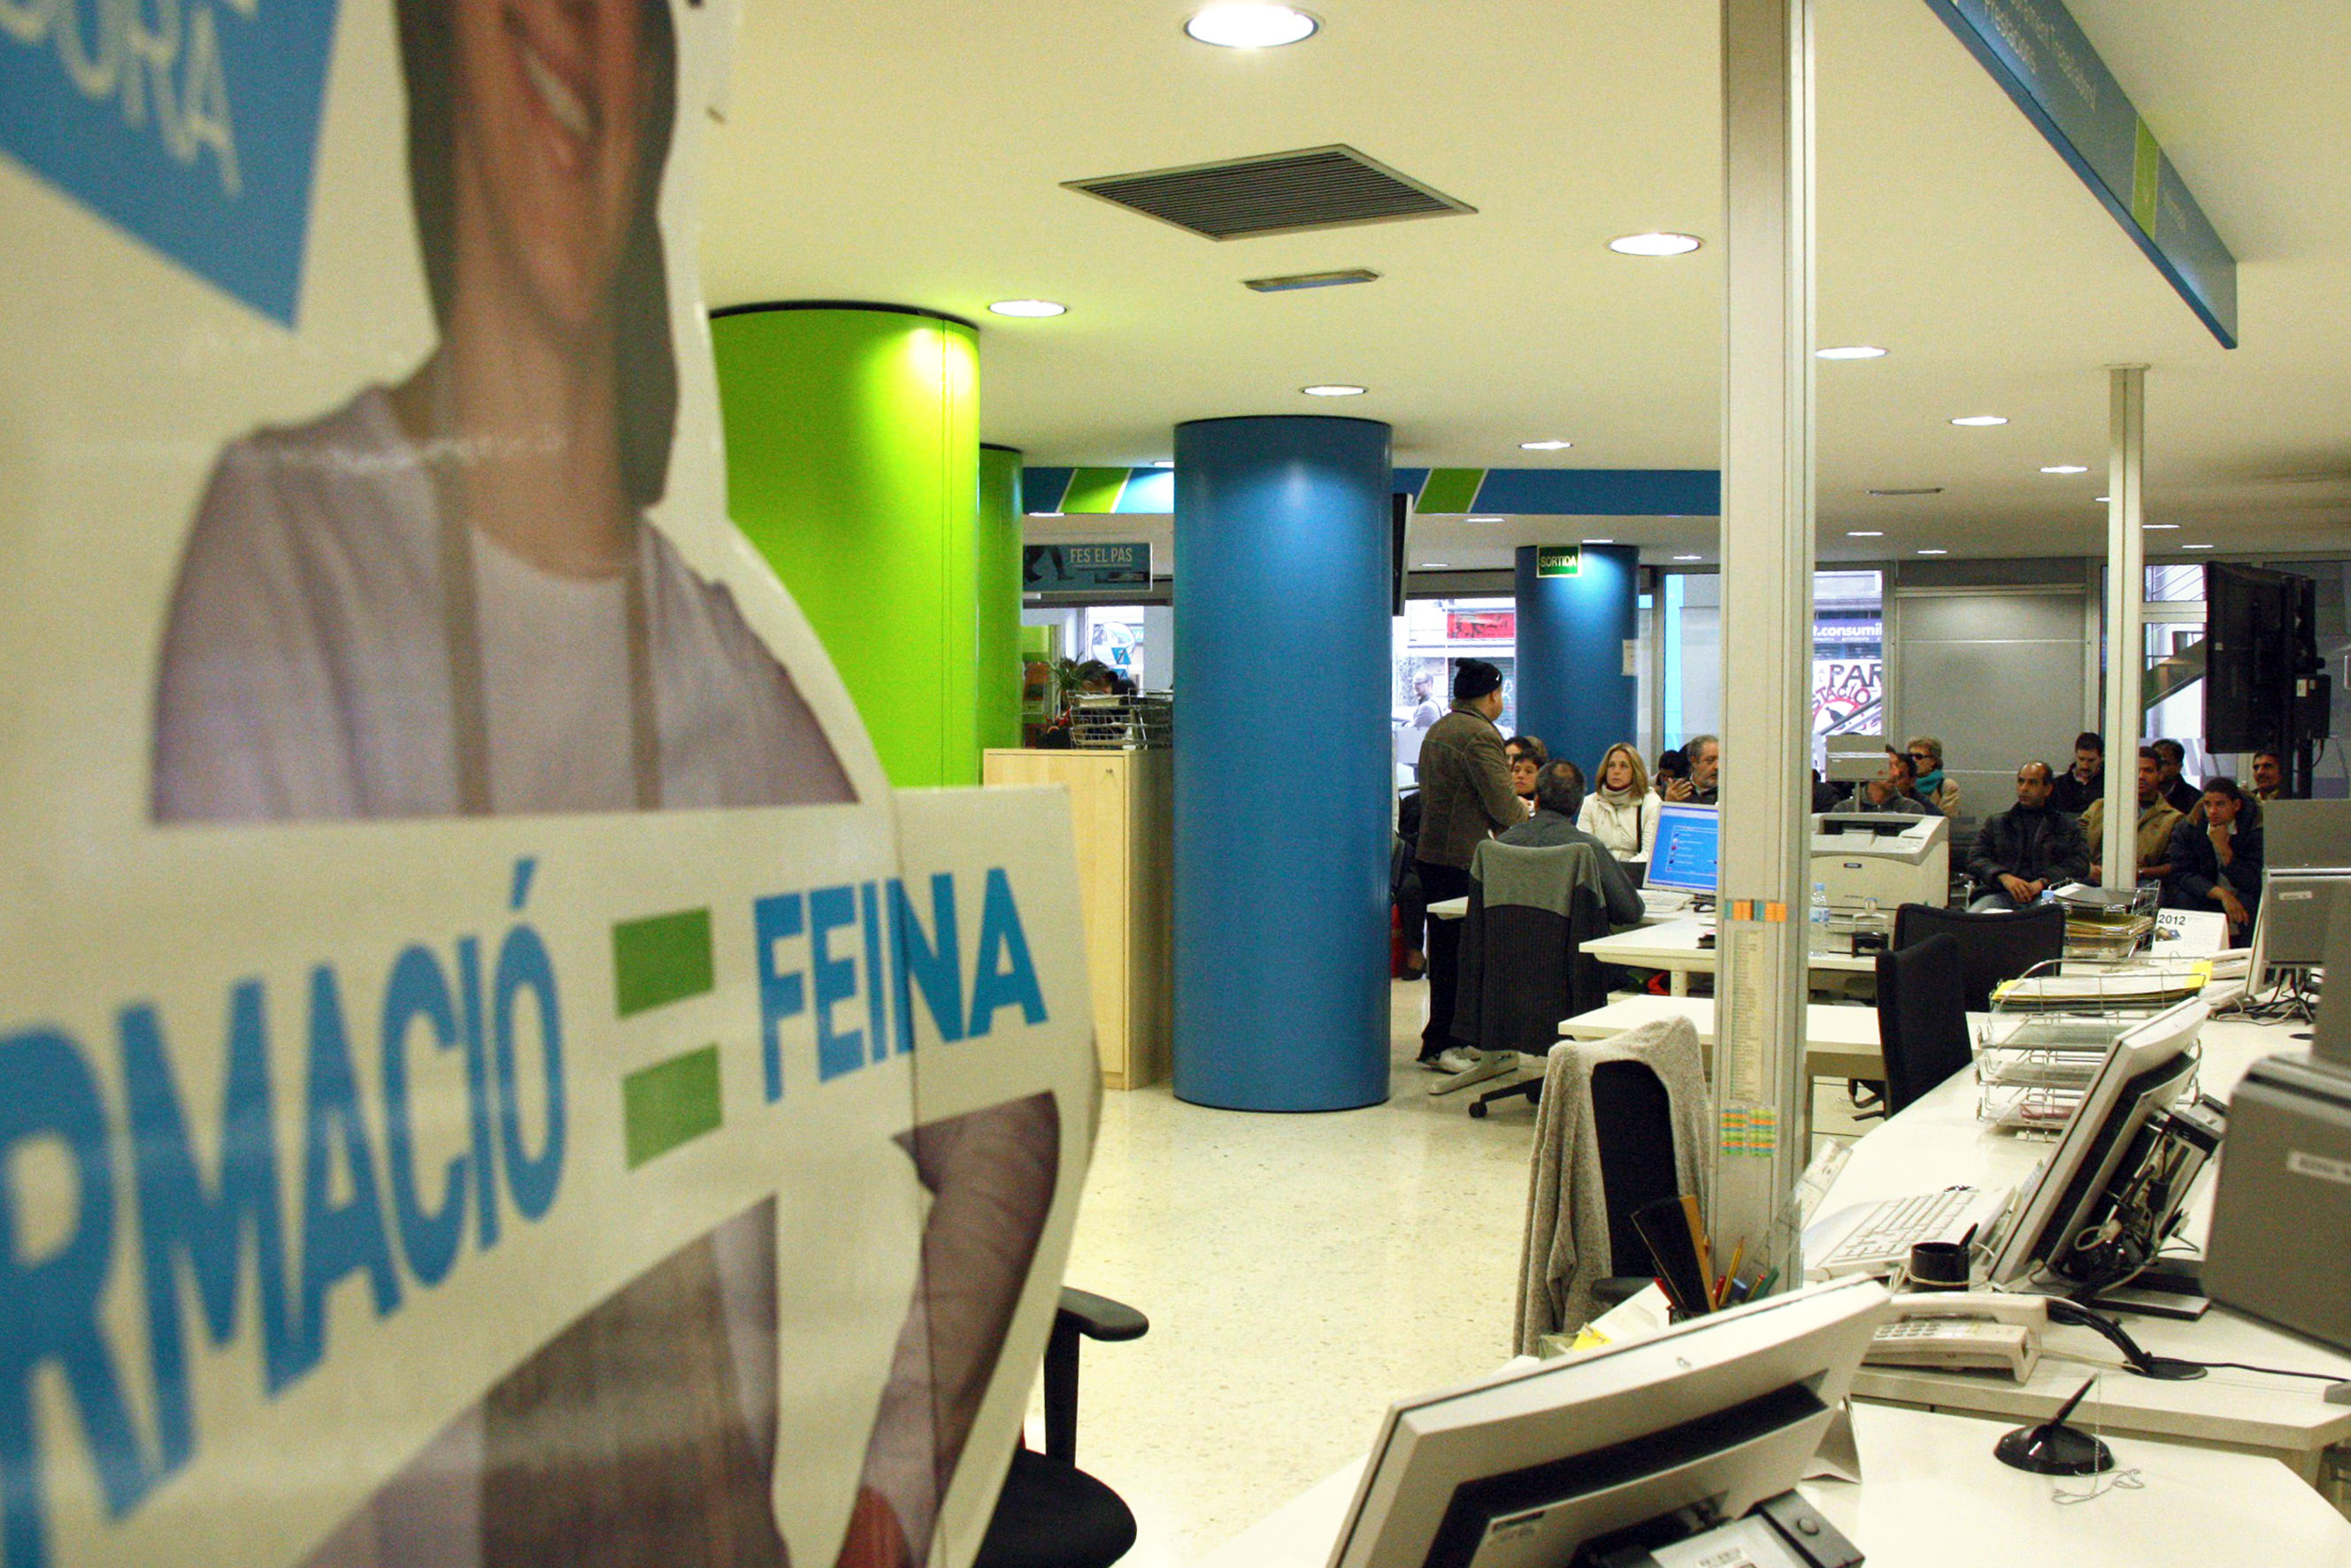 Image of a job centre in Catalonia (by ACN)